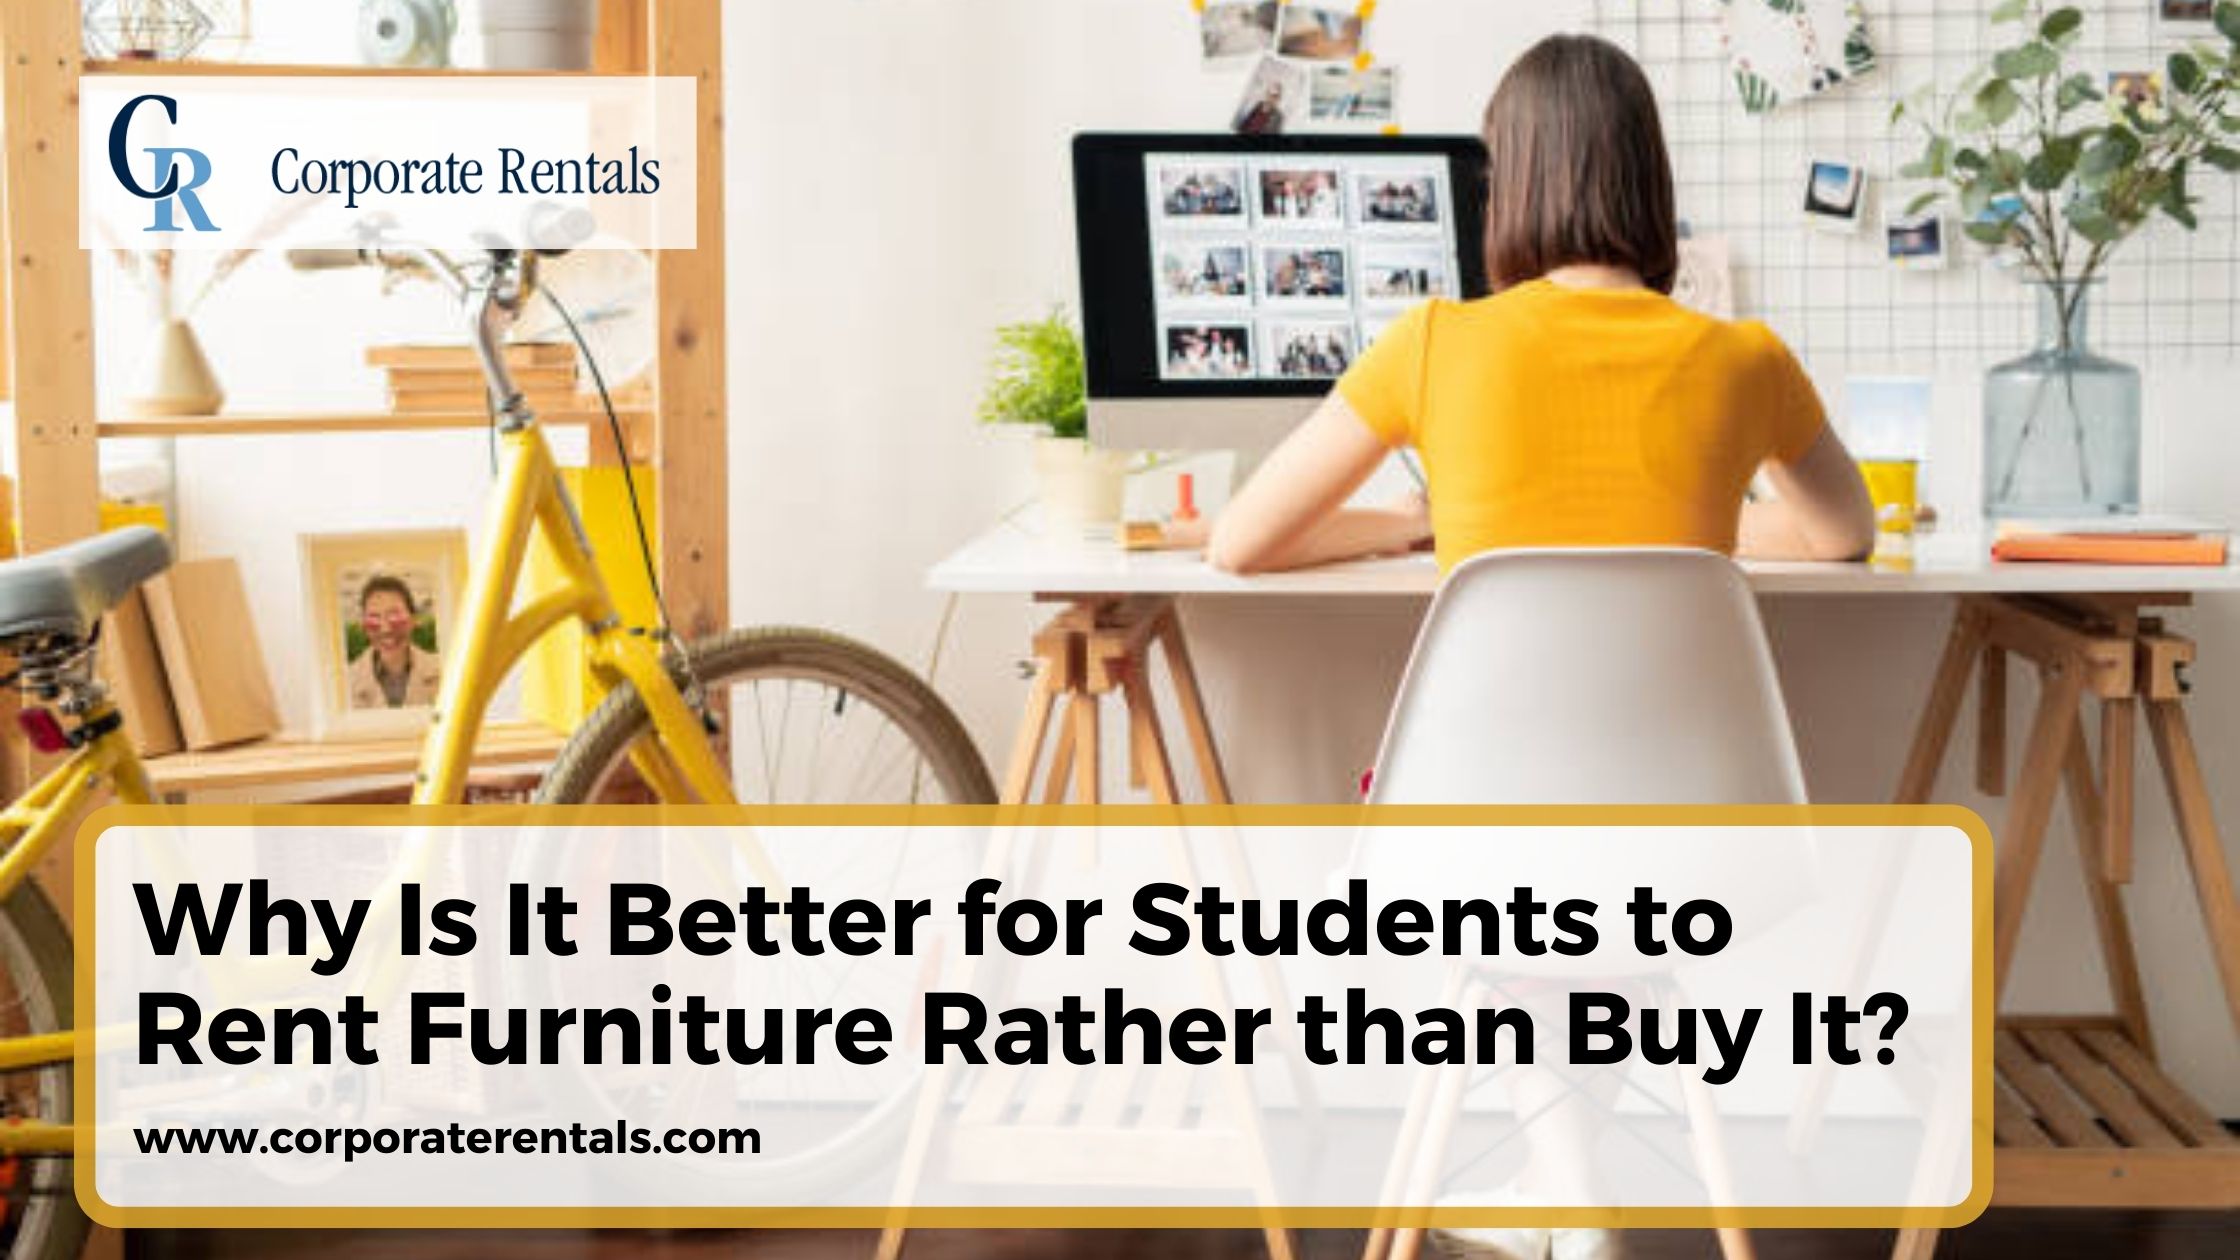 7 Reasons: Why is It Better for Students to Rent Furniture Rather than Buy It?